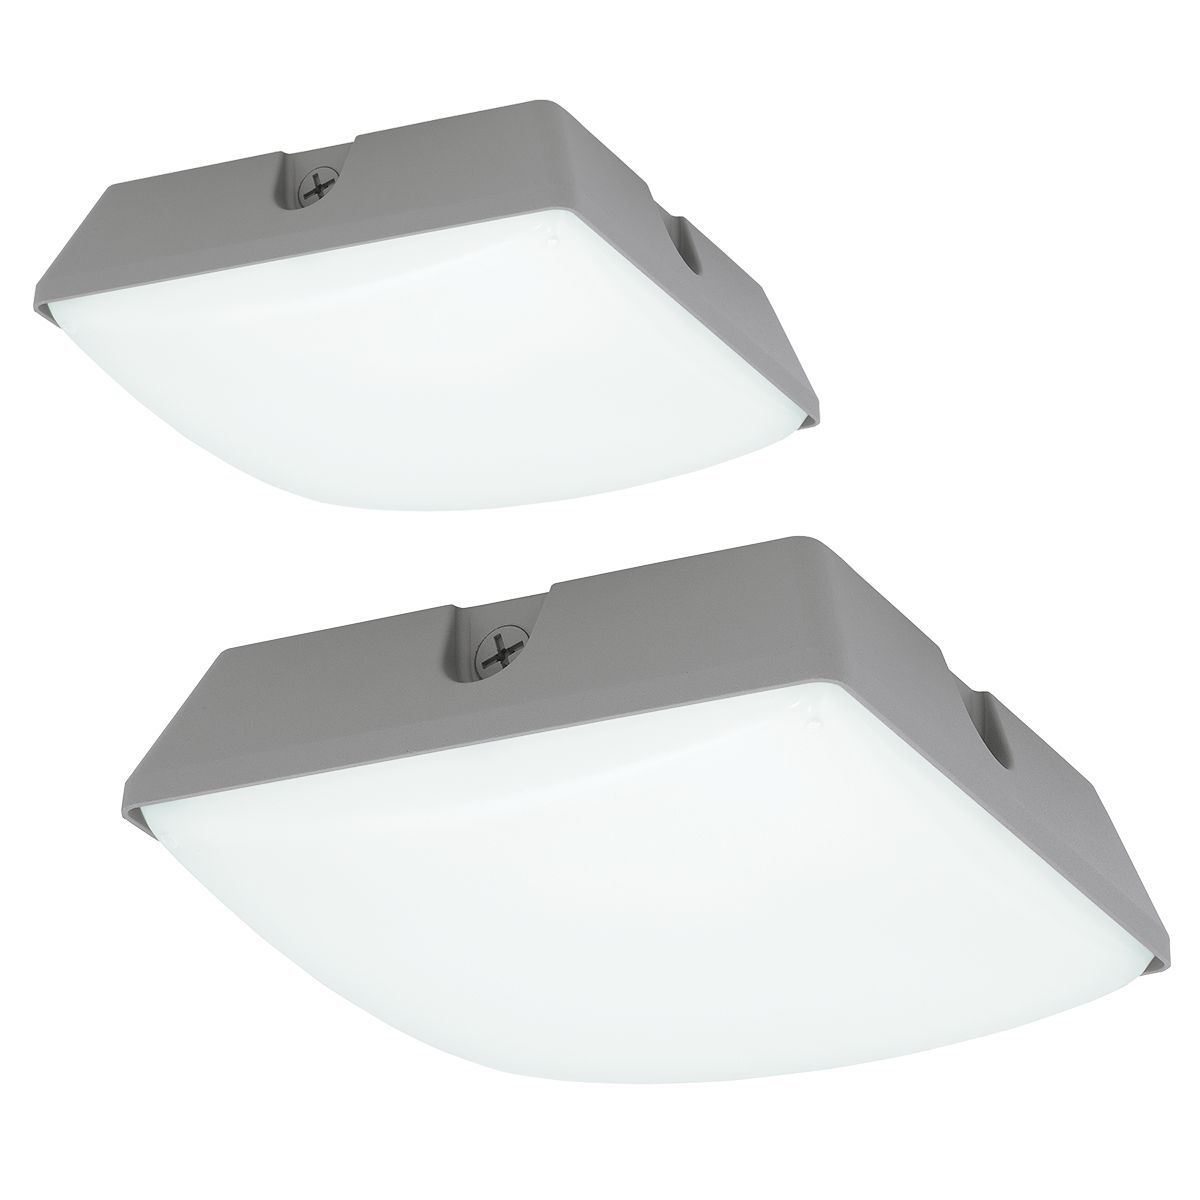 Lsq Lumasquare Series | Ceiling, Canopy & Garage | Commercial Intended For Commercial Outdoor Ceiling Lights (View 7 of 15)